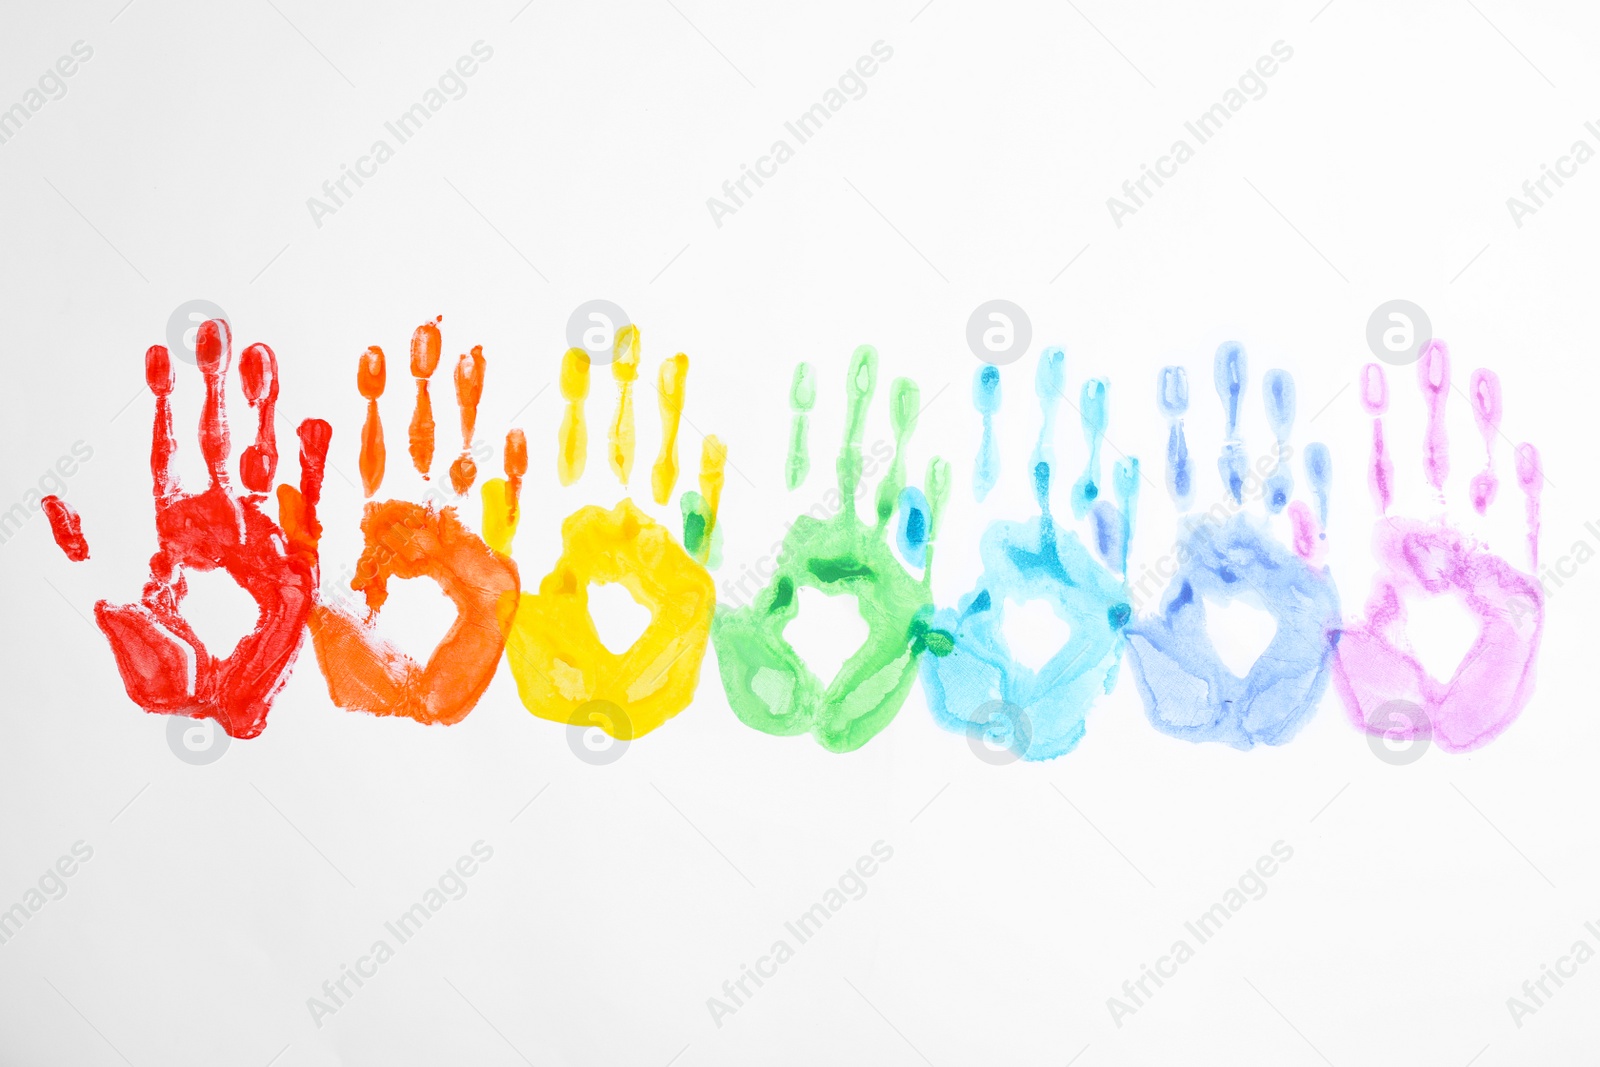 Photo of Handprints made with bright paints on white background, top view. Rainbow colors